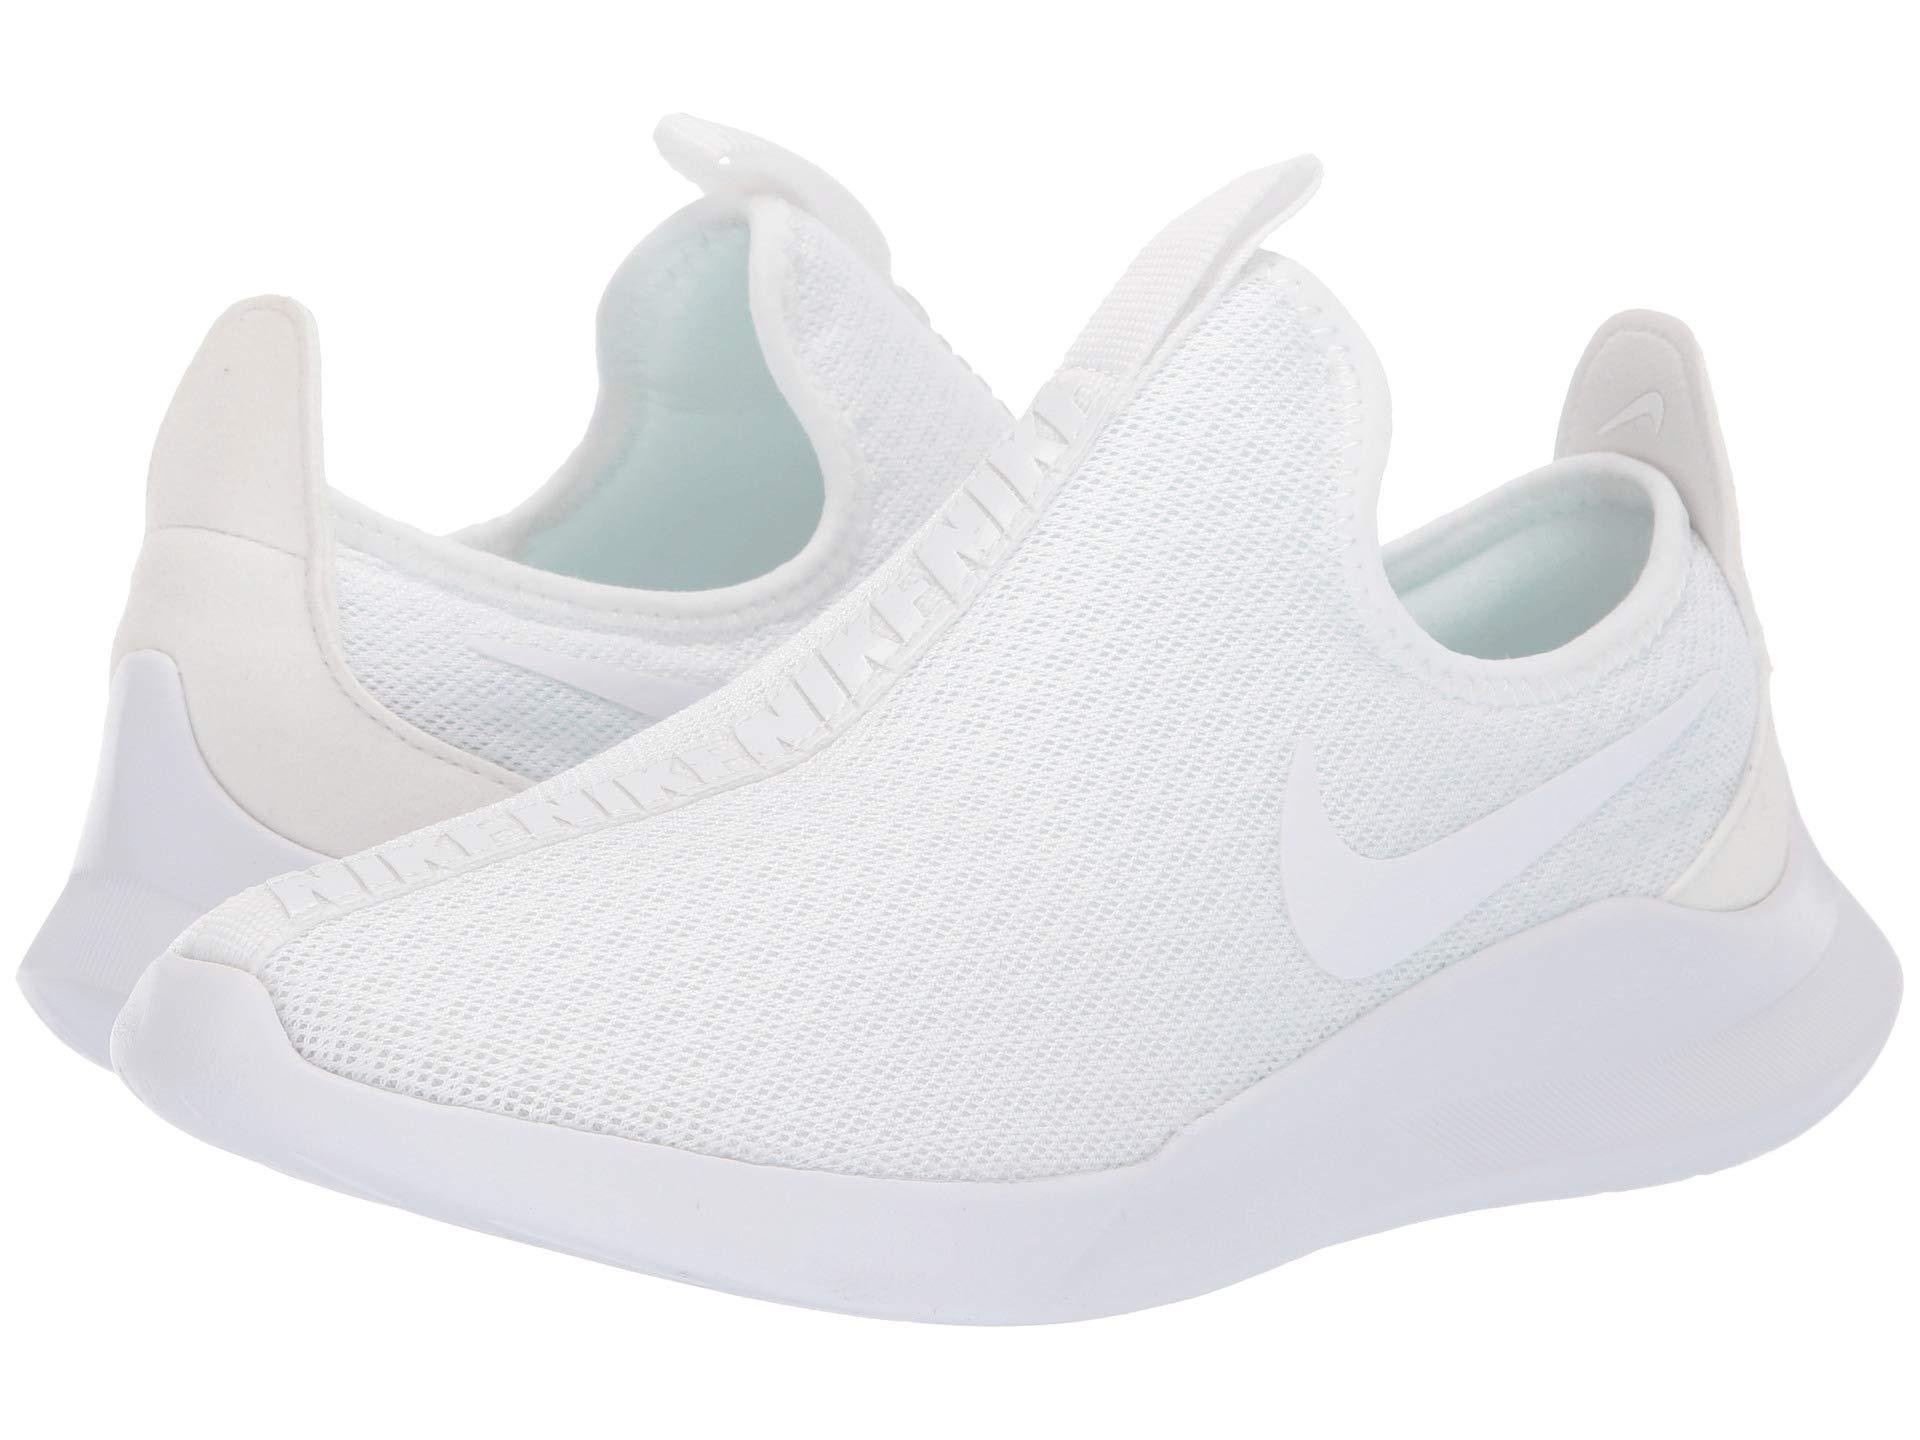 Nike Viale Slip-on (white/white) Classic Shoes - Lyst